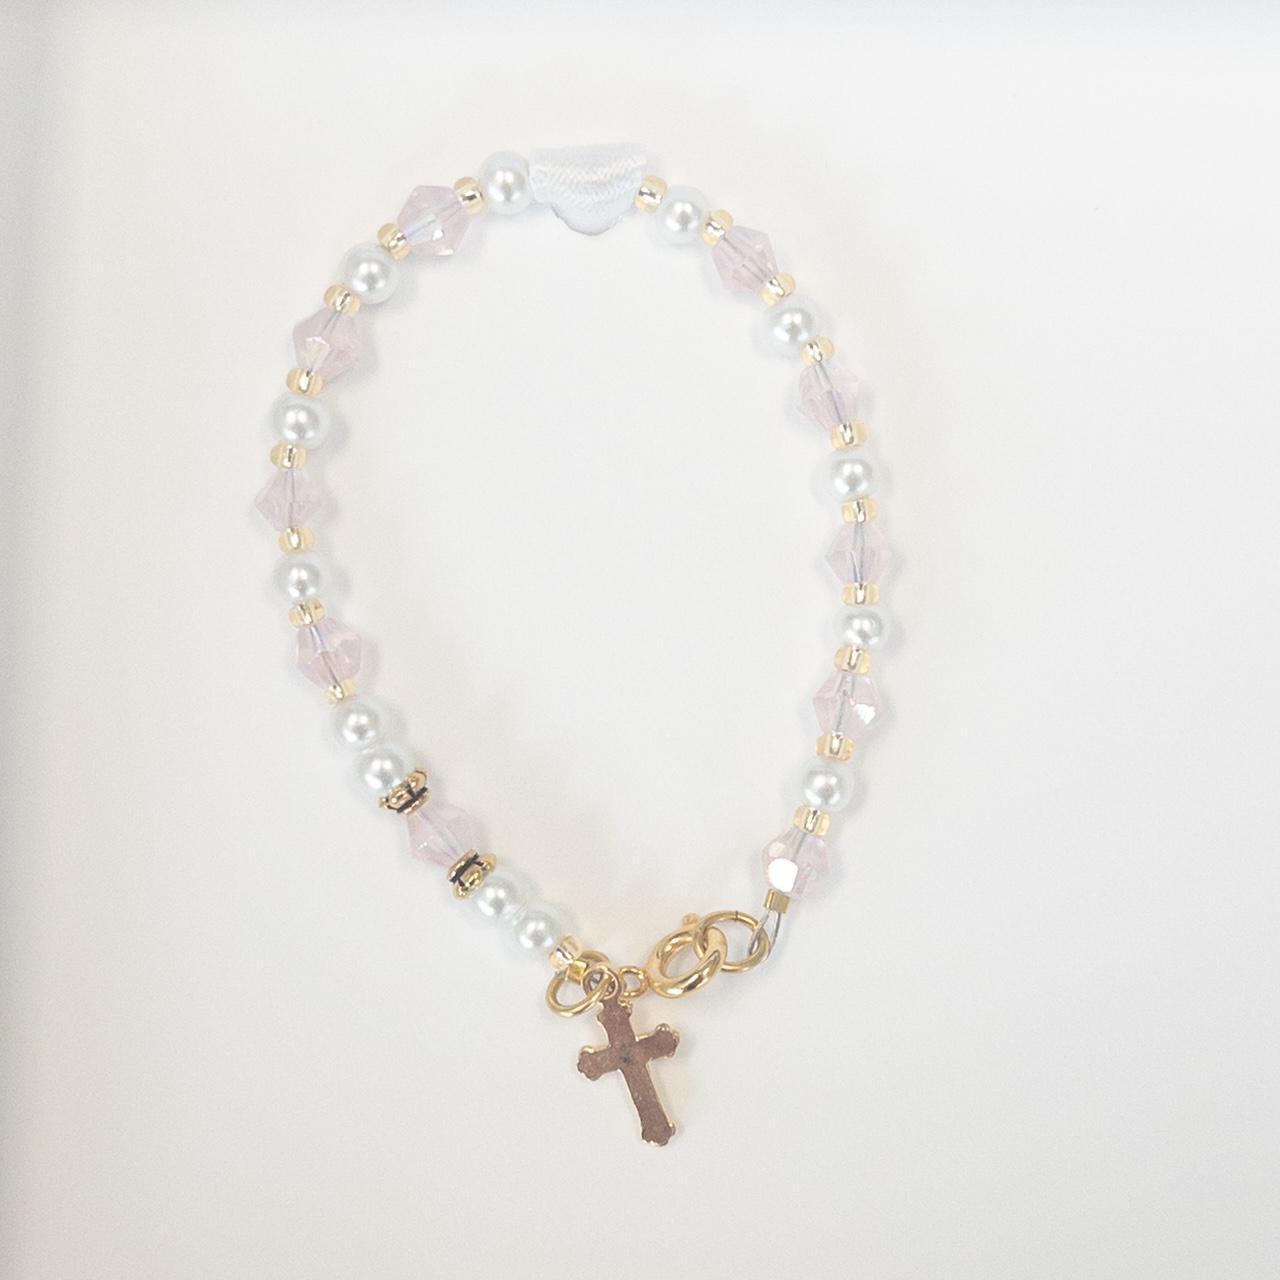 Baby's First Rosary Bracelet